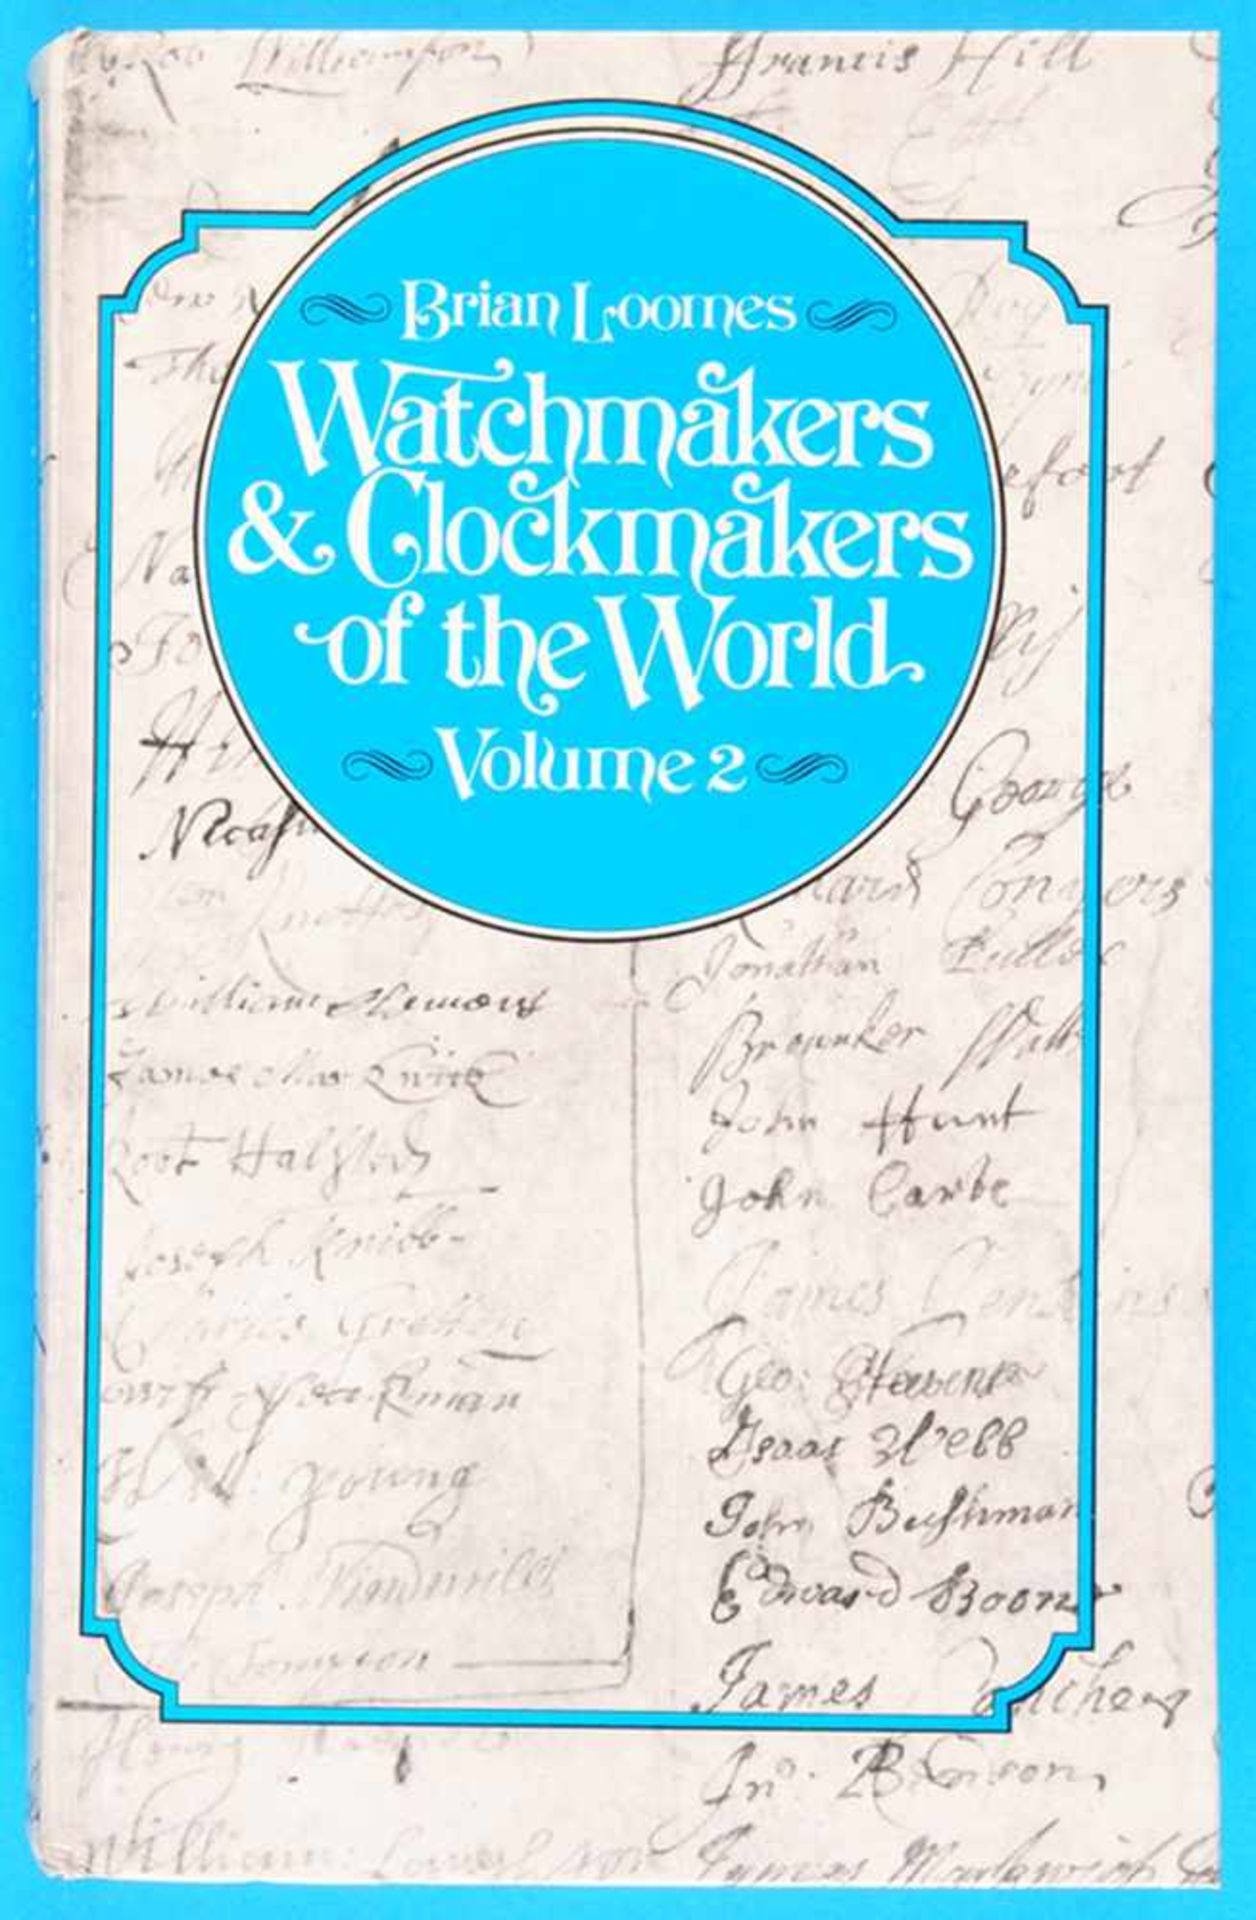 Brian Loomes, Watchmakers and Clockmakers of the World, Volume 2Brian Loomes, Watchmakers and